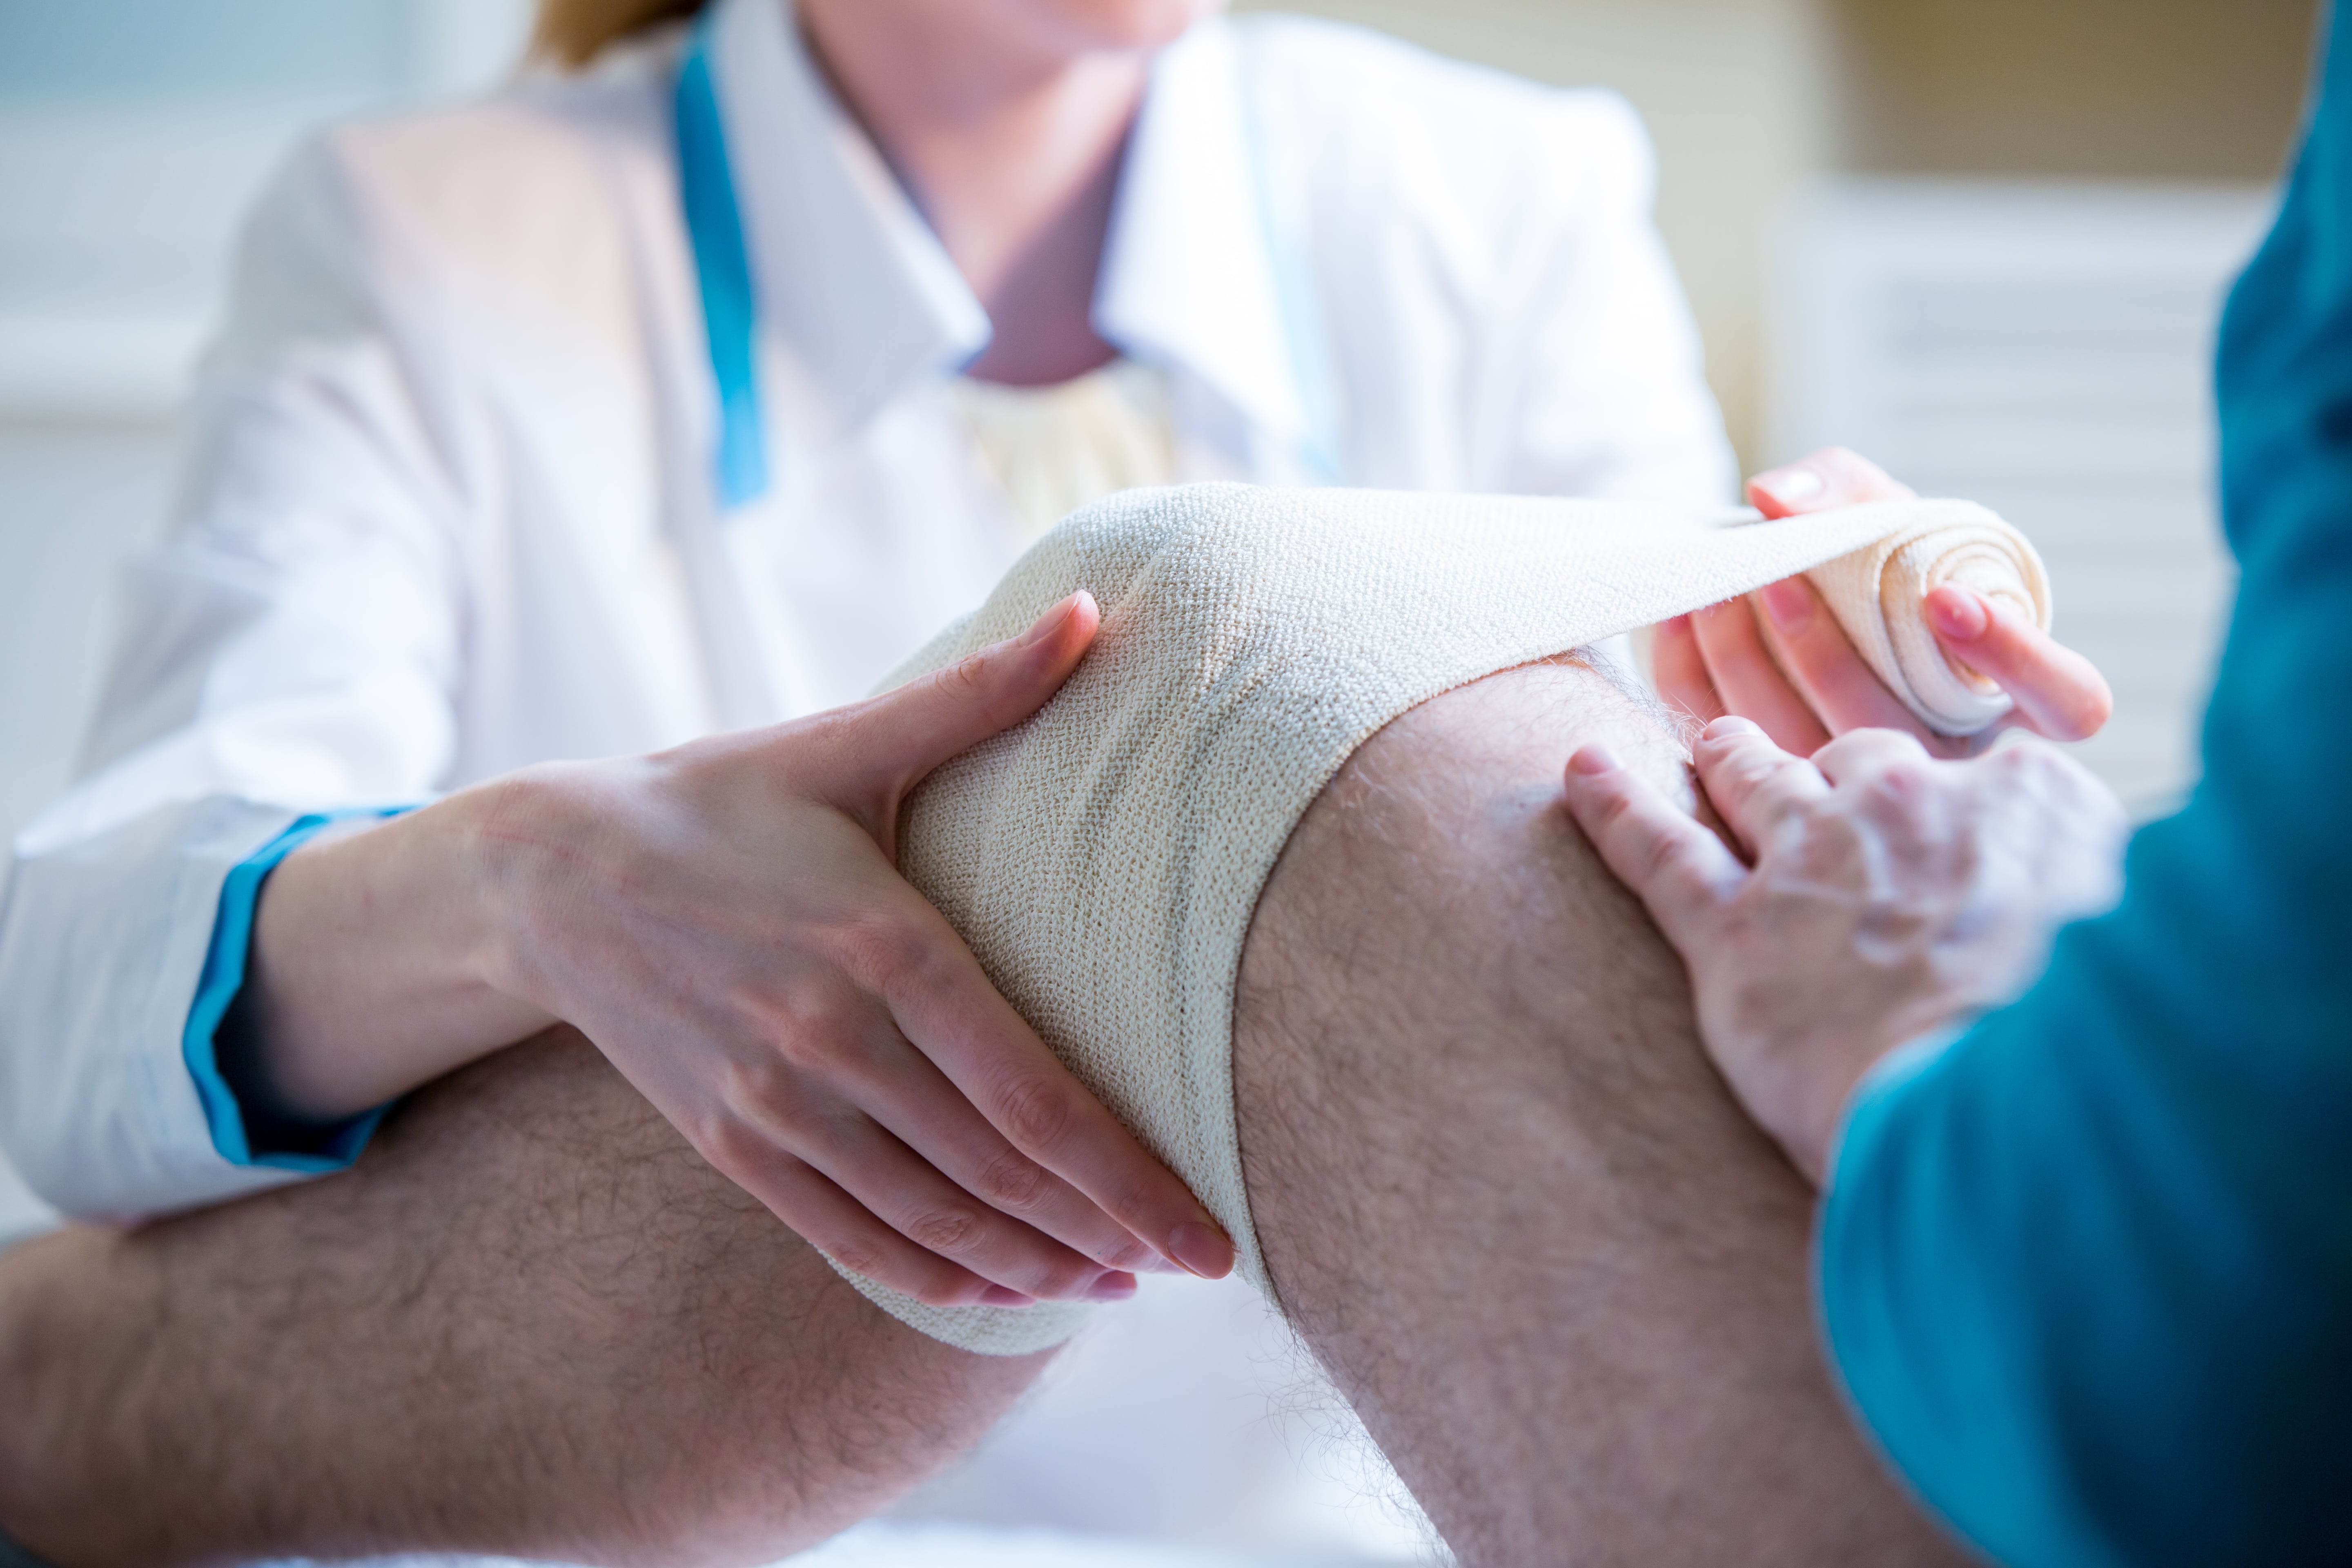 Doctor putting bandage on the patient's knee injury.